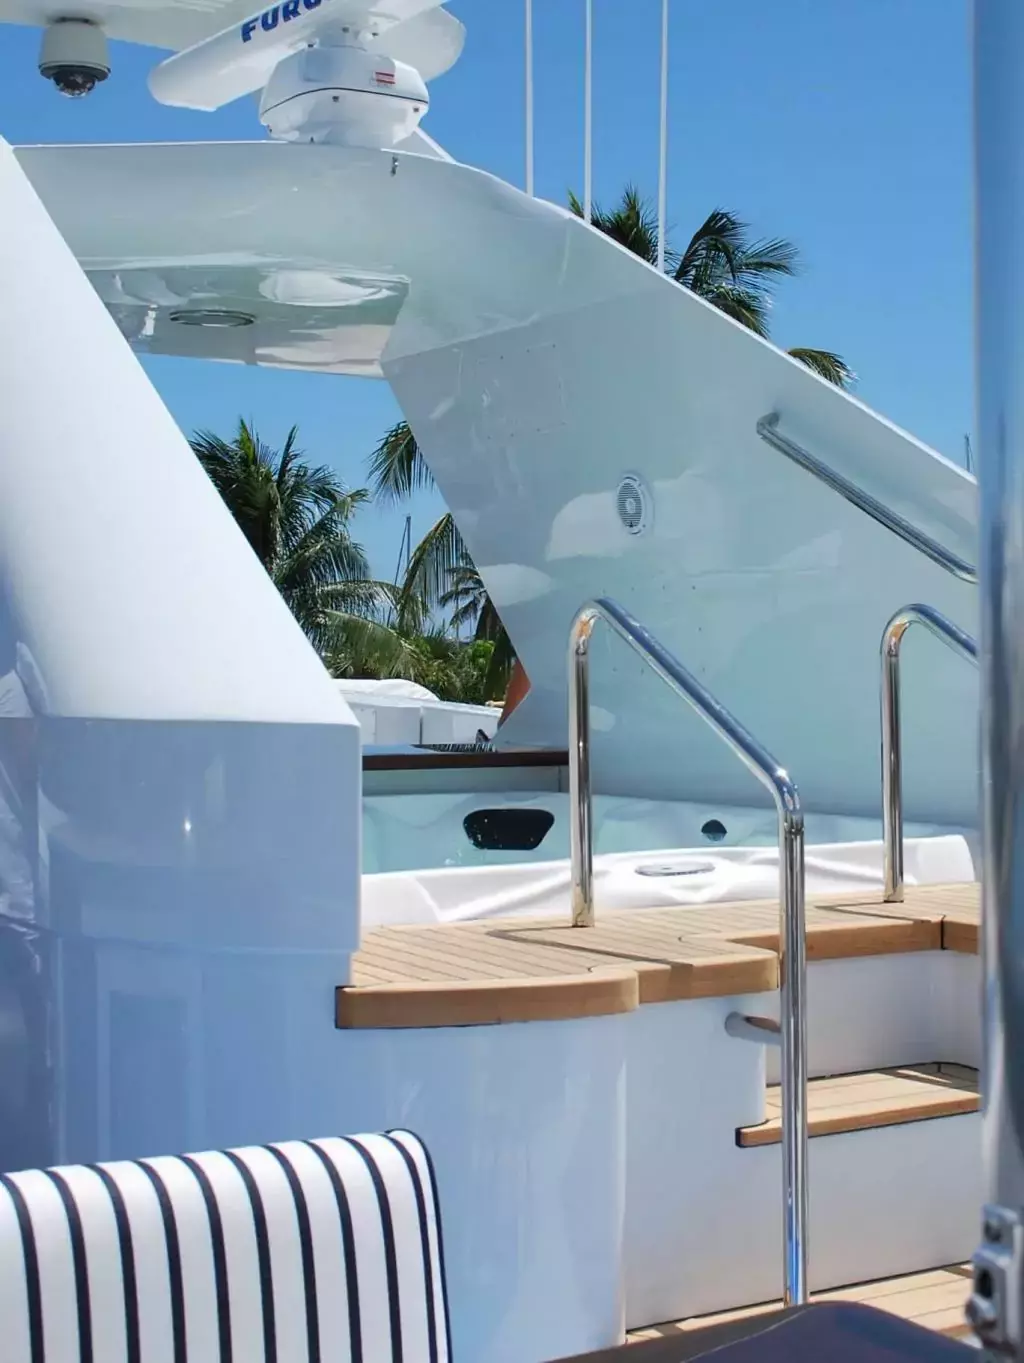 Themis by Trinity Yachts - Top rates for a Charter of a private Superyacht in St Barths